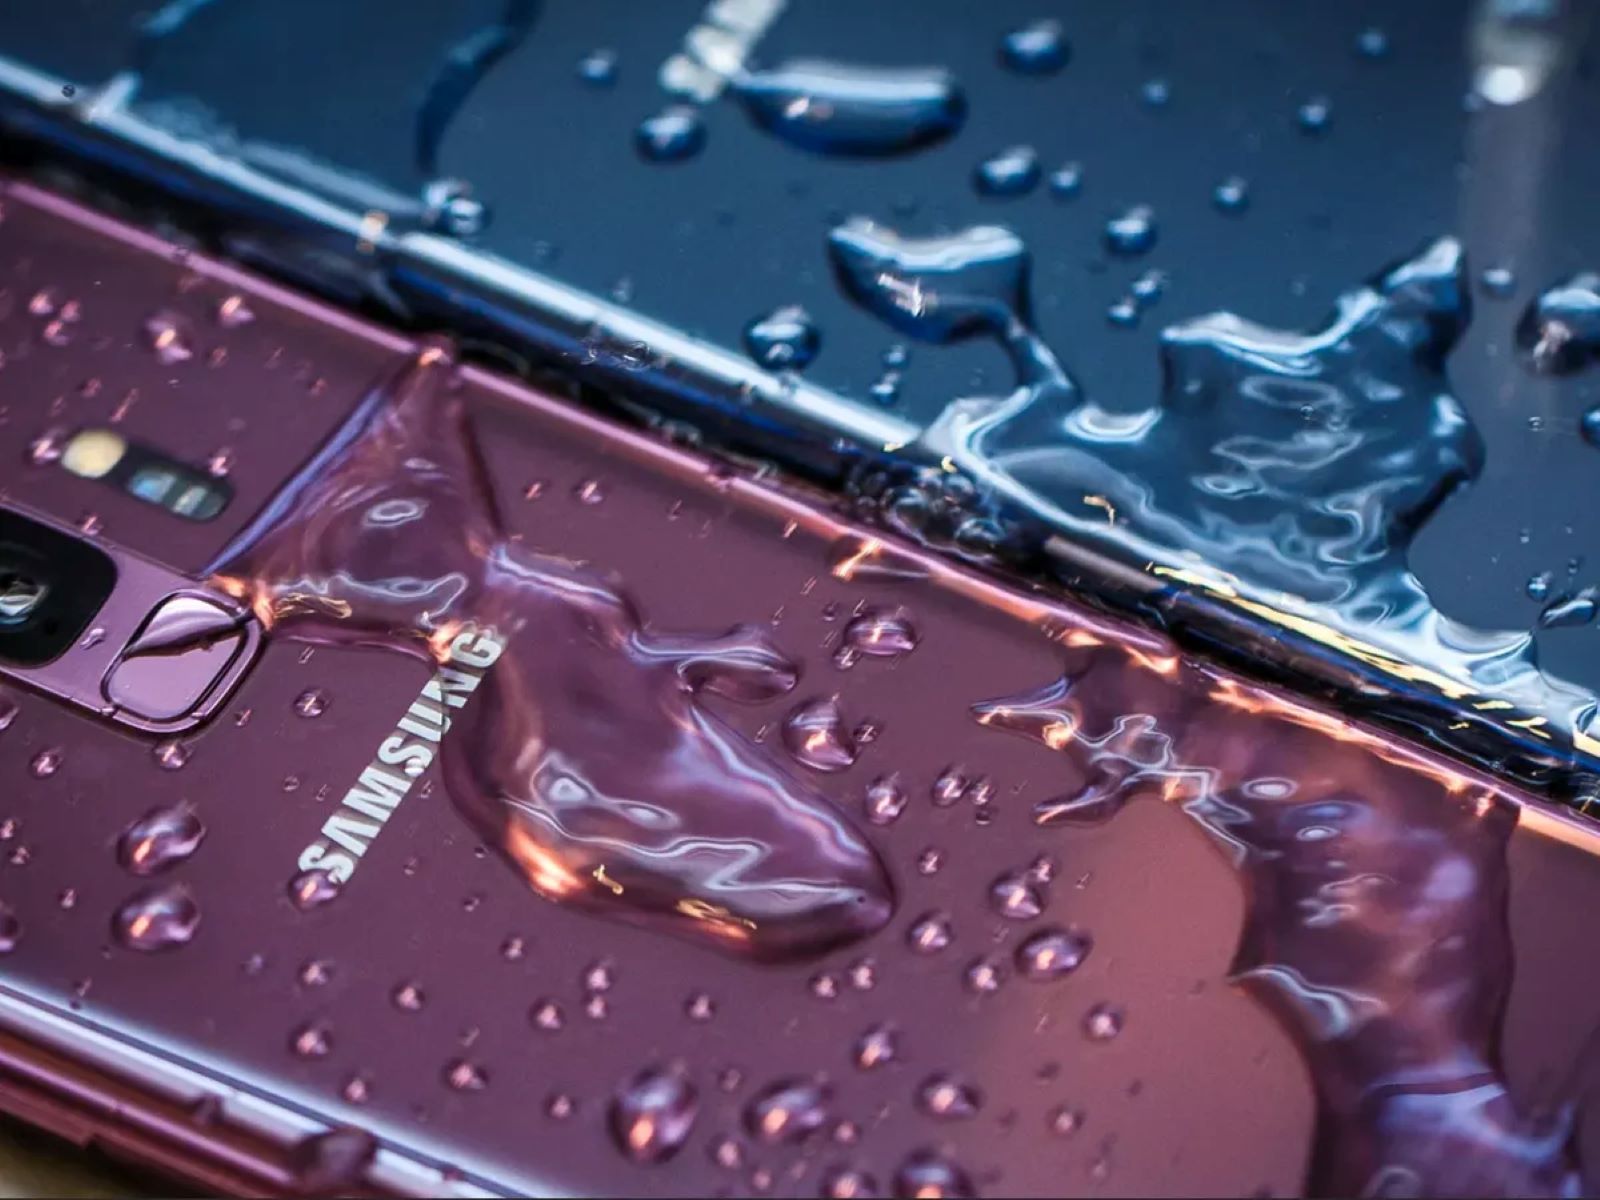 Samsung Phones With Waterproof Features: A Buyer’s Guide